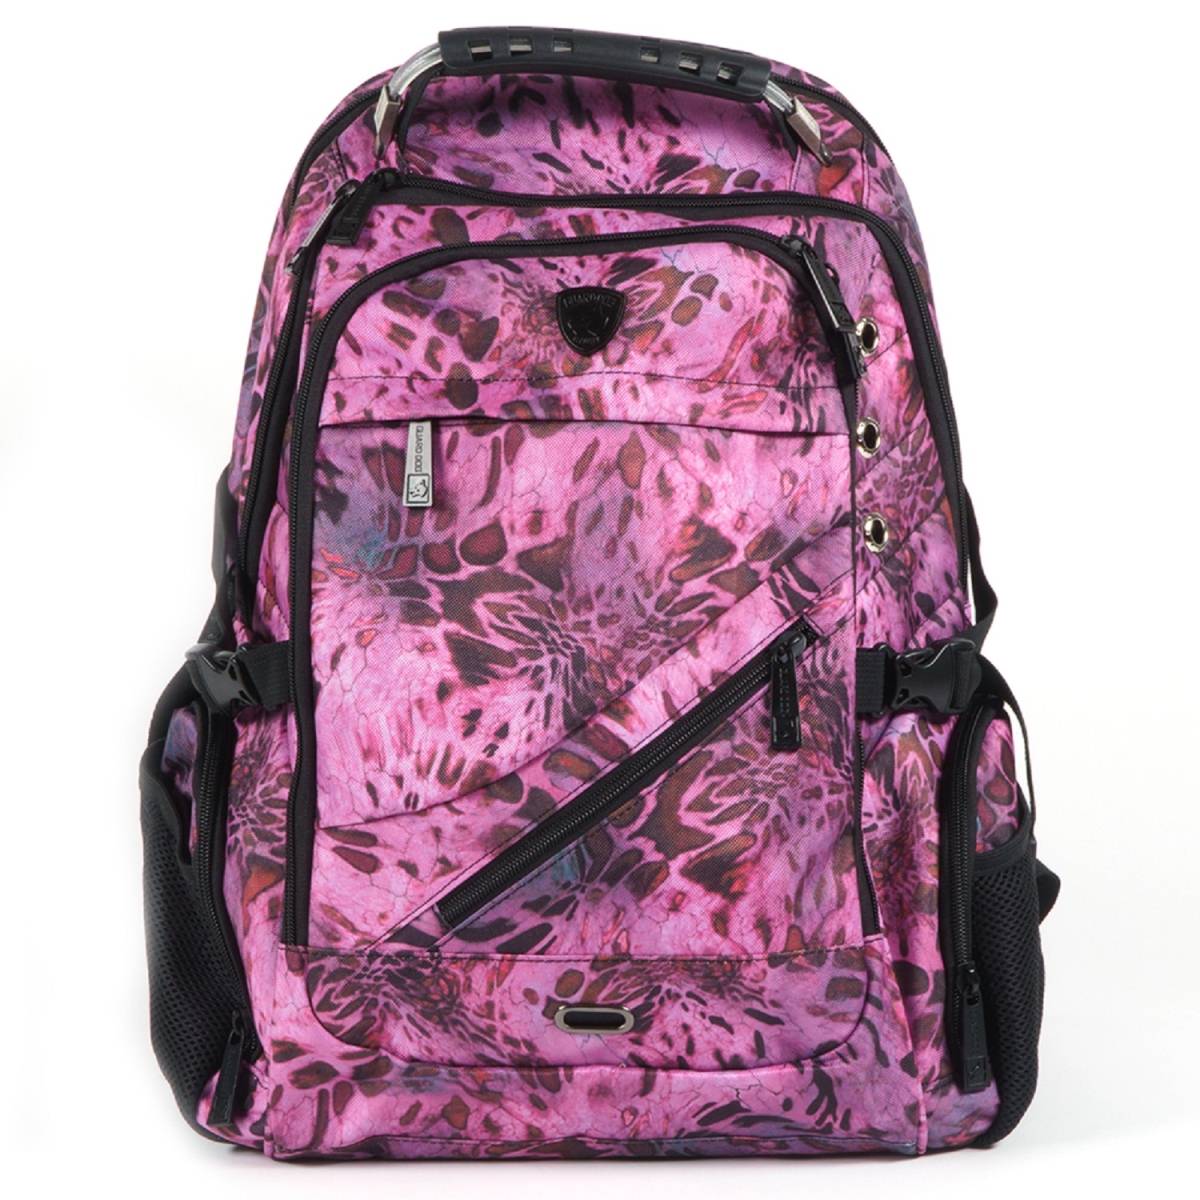 1108814 Bullet Proof Backpack, Pinkout